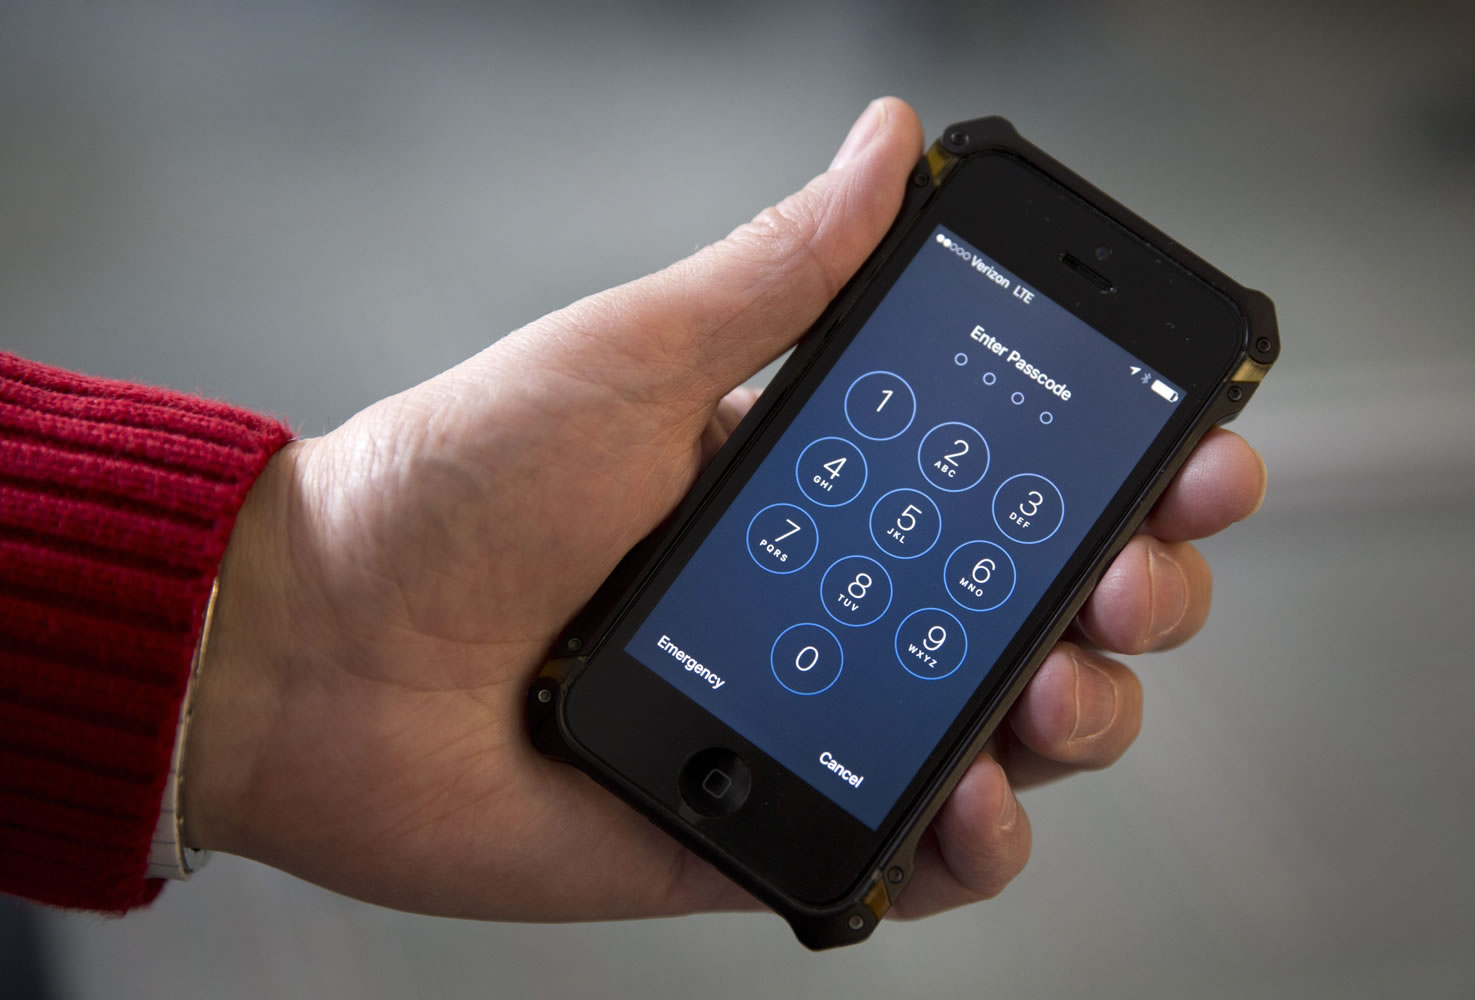 An iPhone is seen in Washington, Wednesday, Feb. 17, 2016. A U.S. magistrate judge has ordered Apple to help the FBI break into a work-issued iPhone used by one of the two gunmen in the mass shooting in San Bernardino, California, a significant legal victory for the Justice Department in an ongoing policy battle between digital privacy and national security. Apple CEO Tim Cook immediately objected, setting the stage for a high-stakes legal fight between Silicon Valley and the federal government.